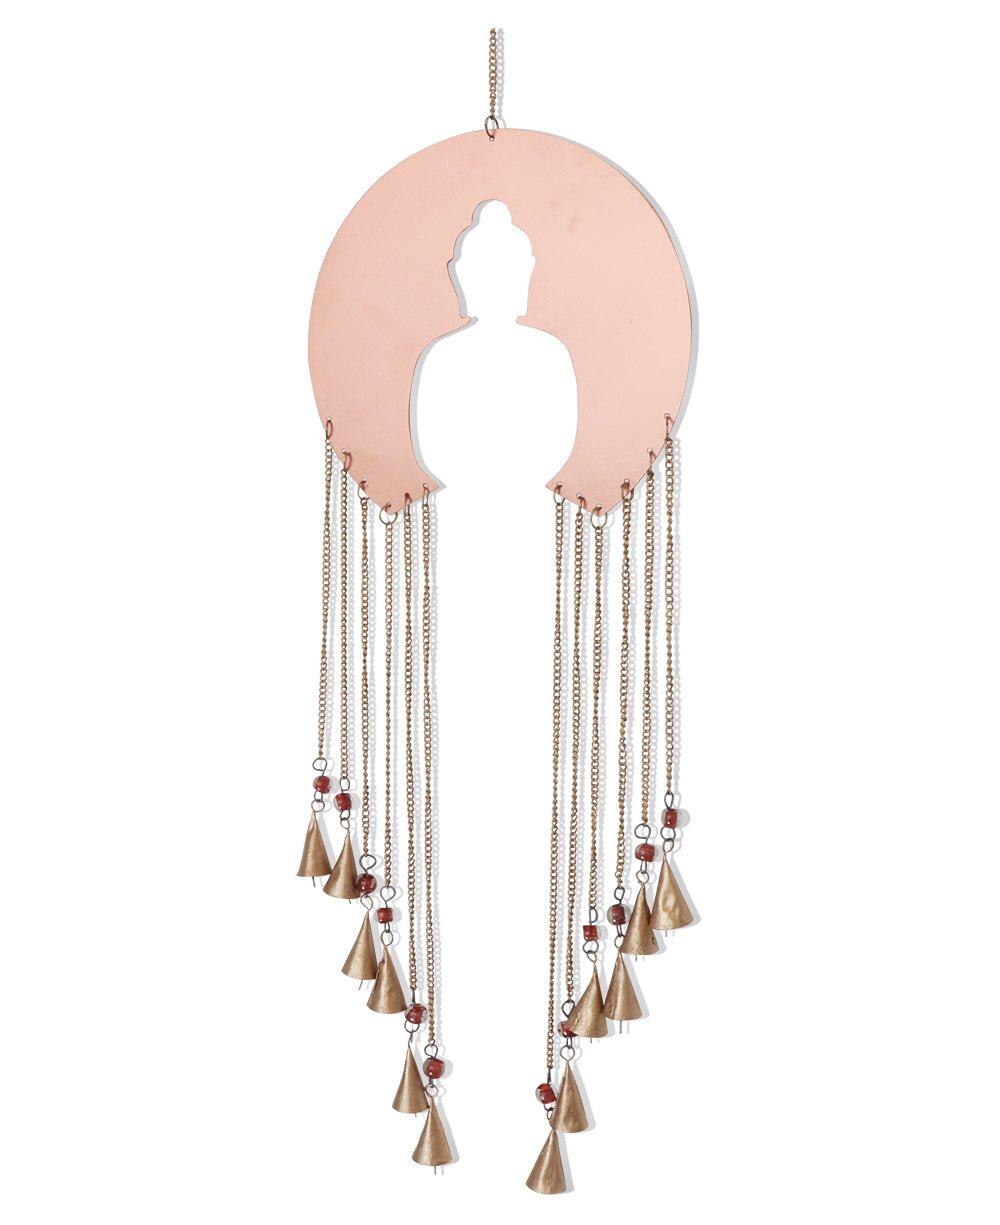 Cascading Bells Buddha Silhouette Fairtrade Wall Hanging - Posters, Prints, & Visual Artwork